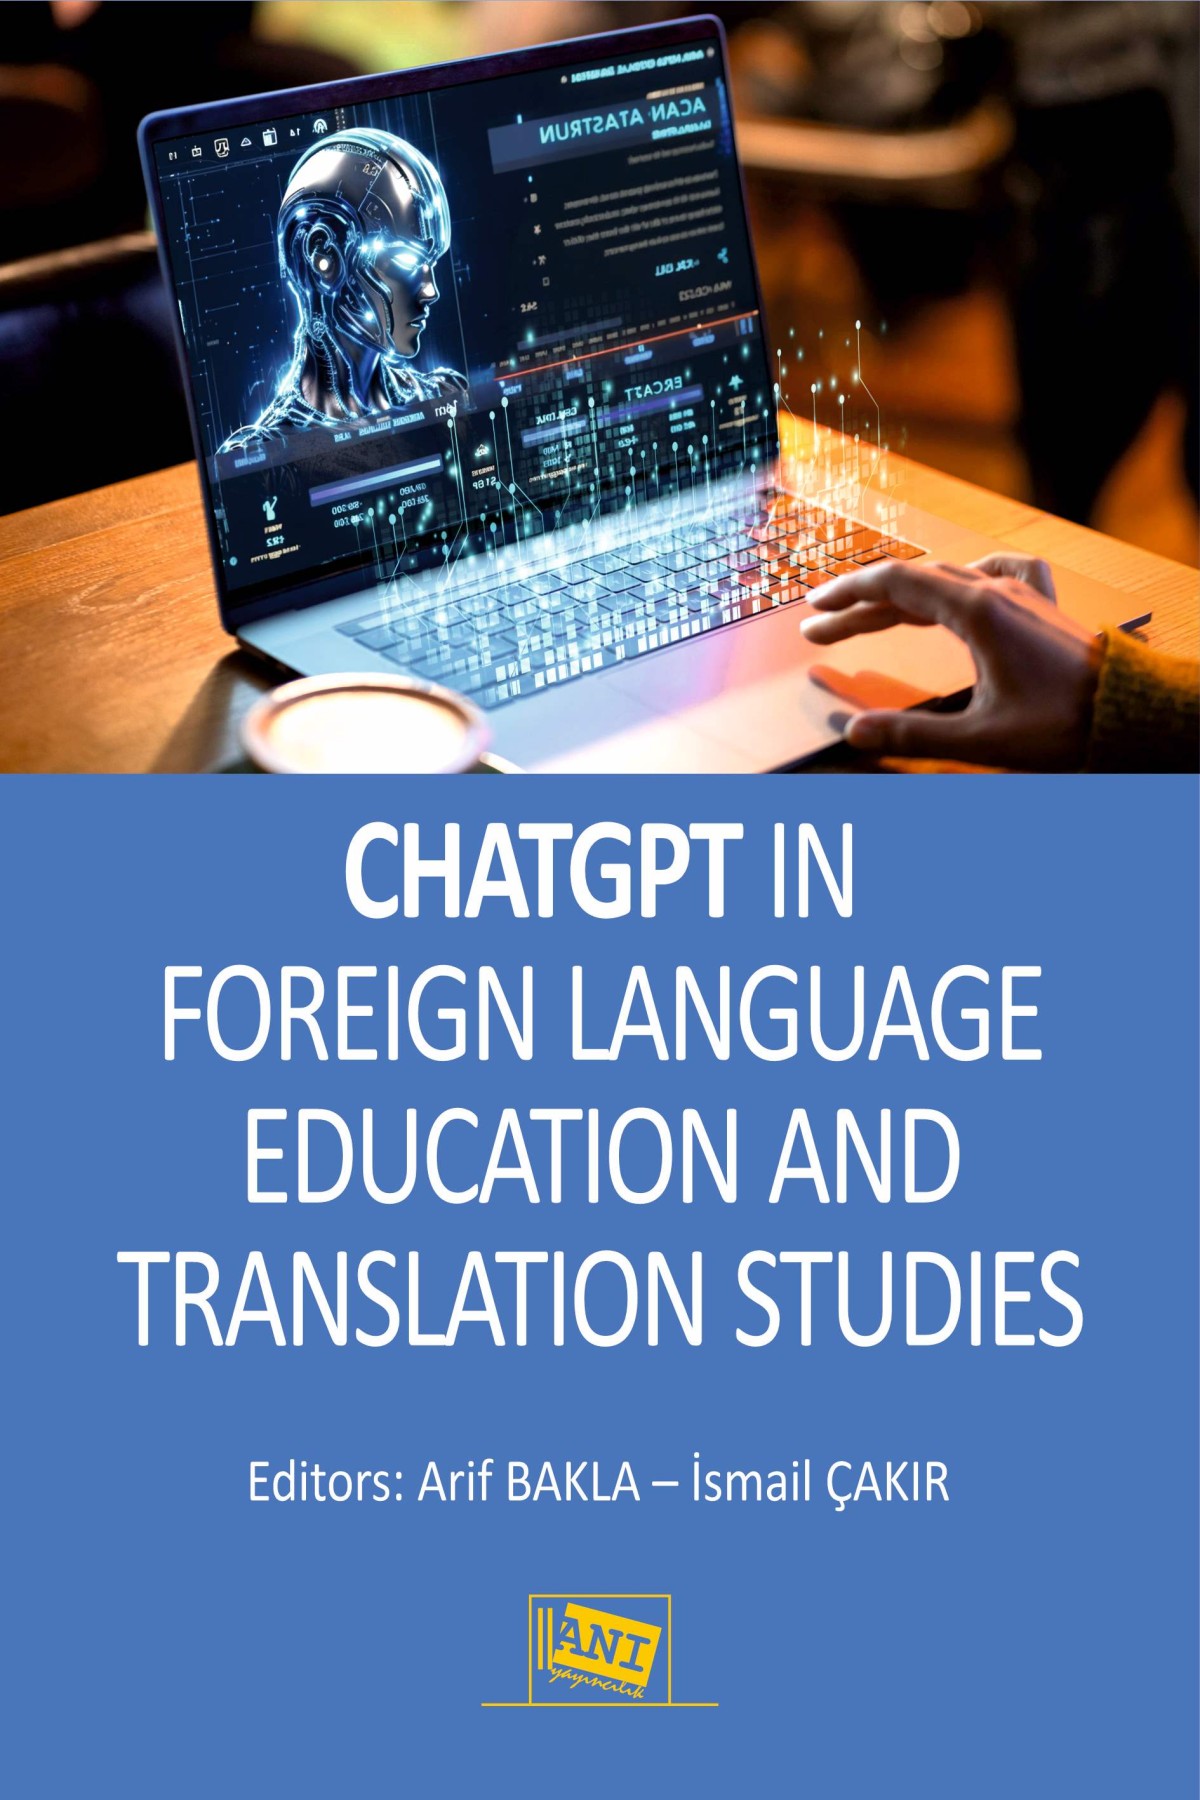 ChatGPT in Foreign Language Education and Translation Studies